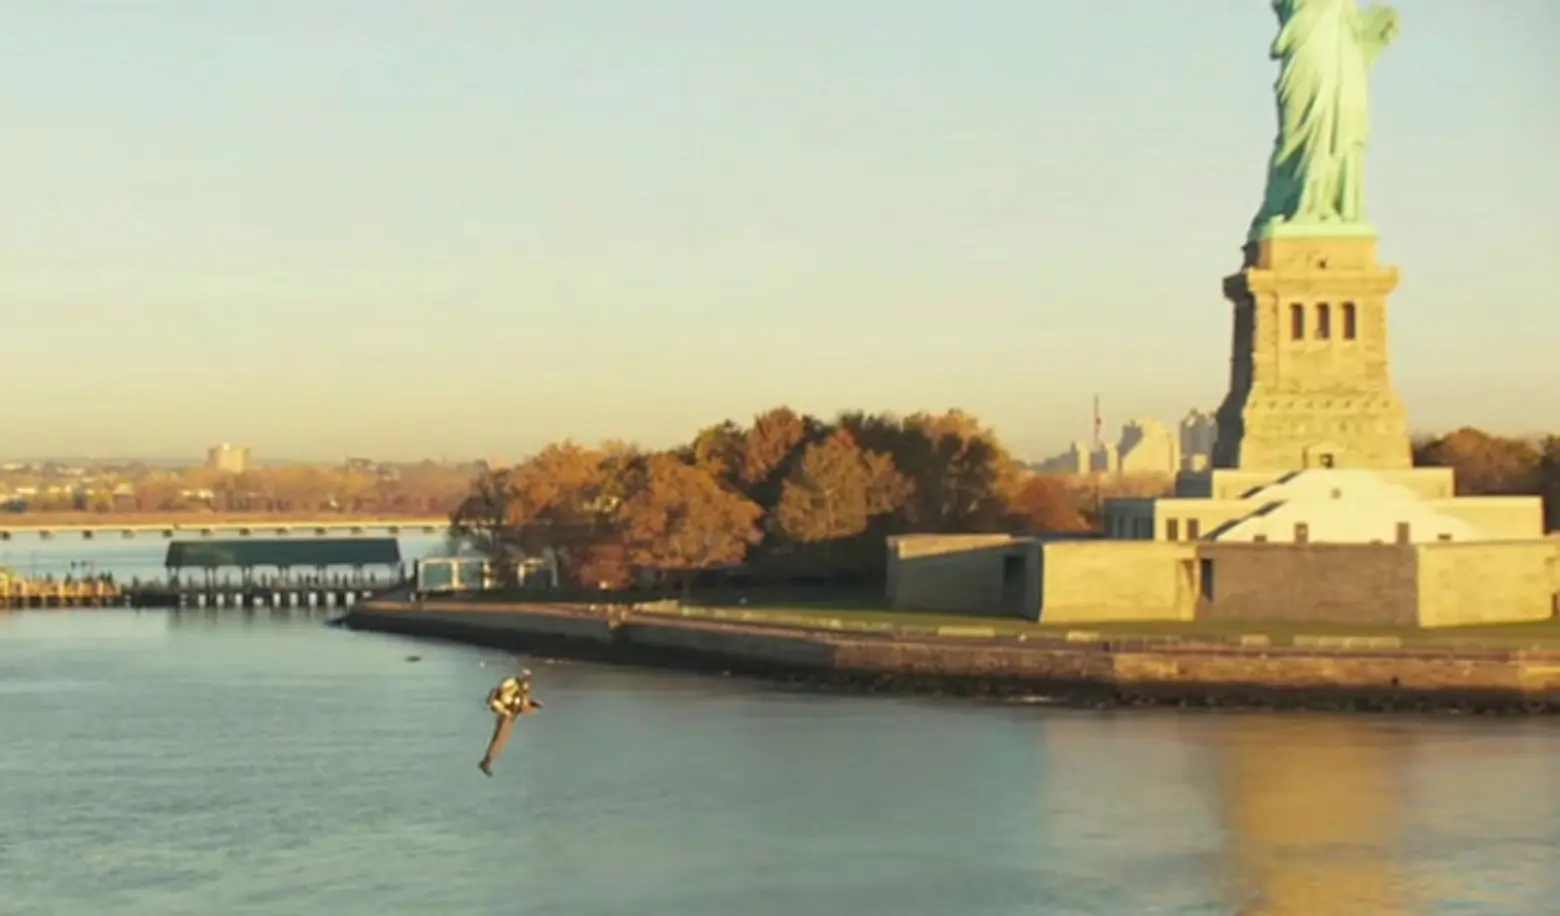 World’s Only Jet Pack Flies Around the Statue of Liberty; The History of the NYC Grid